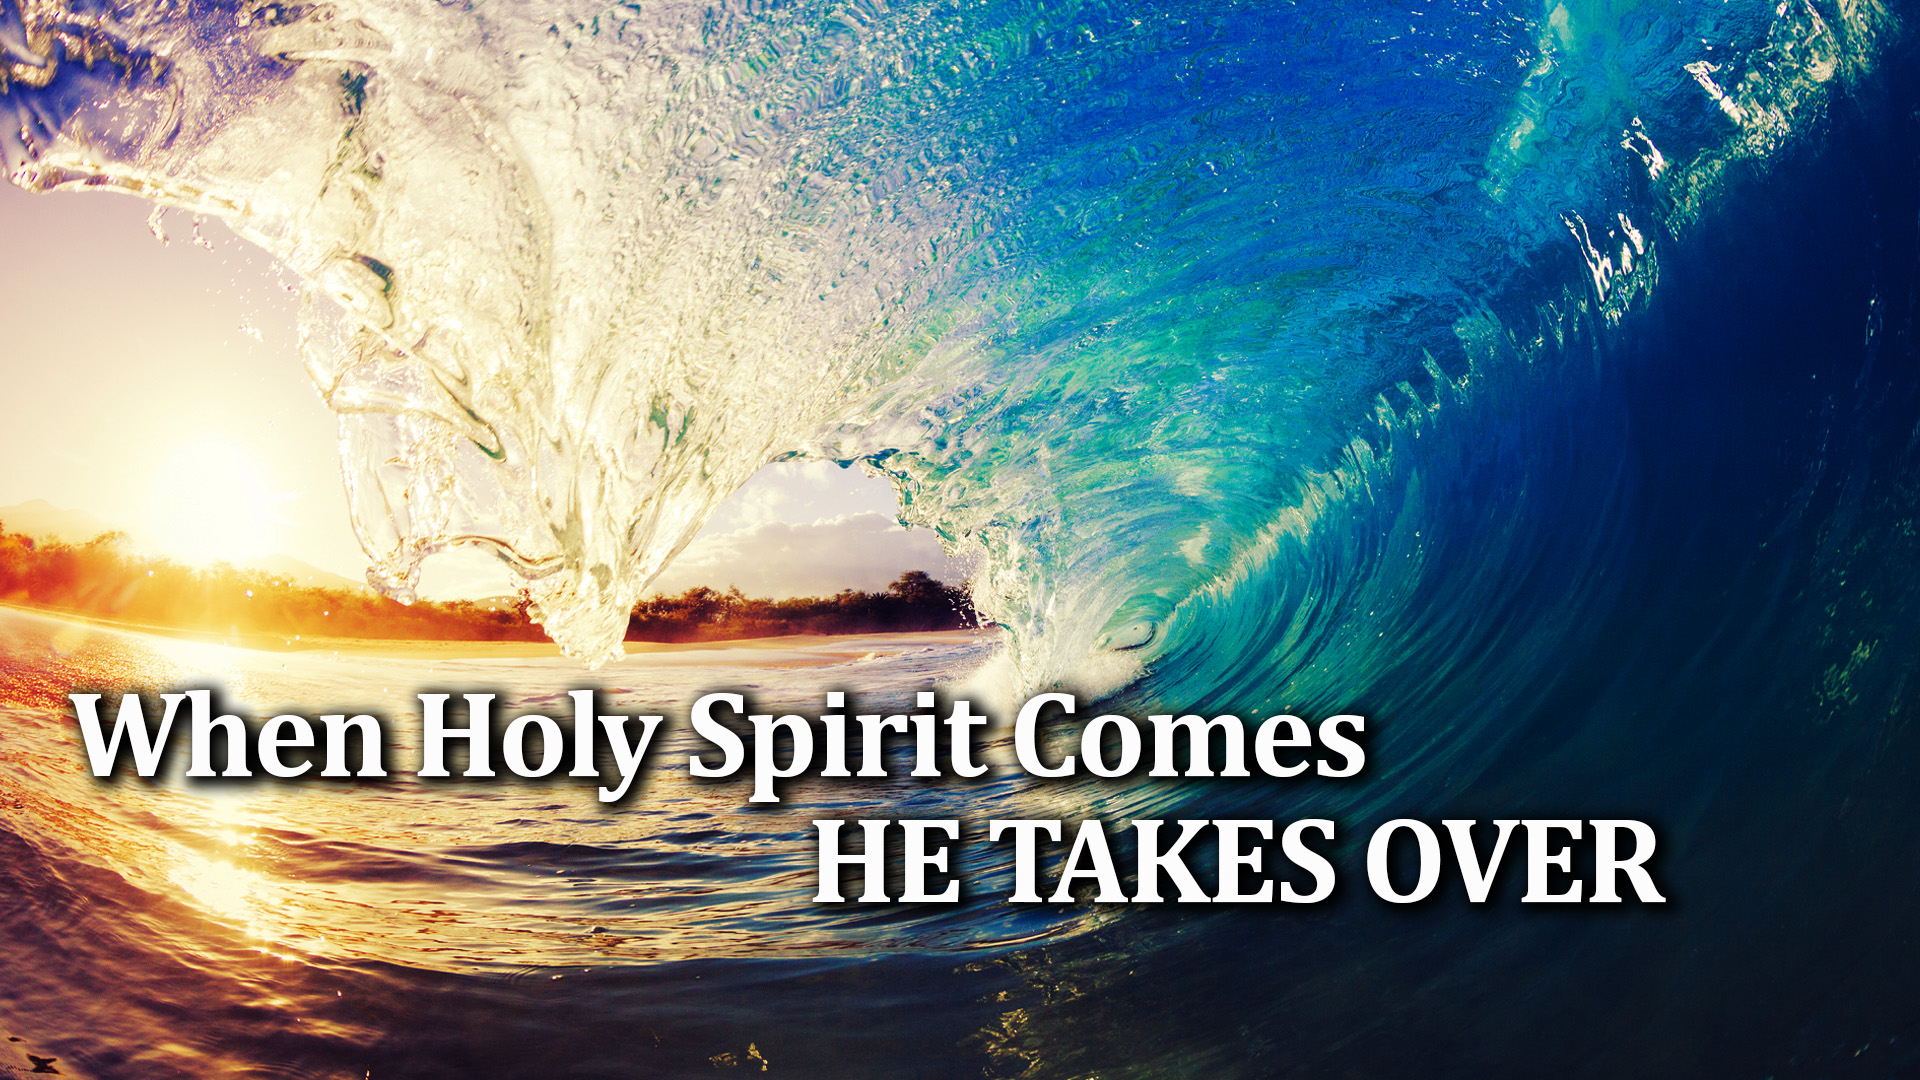 11-16-21 When Holy Spirit Comes He Takes Over